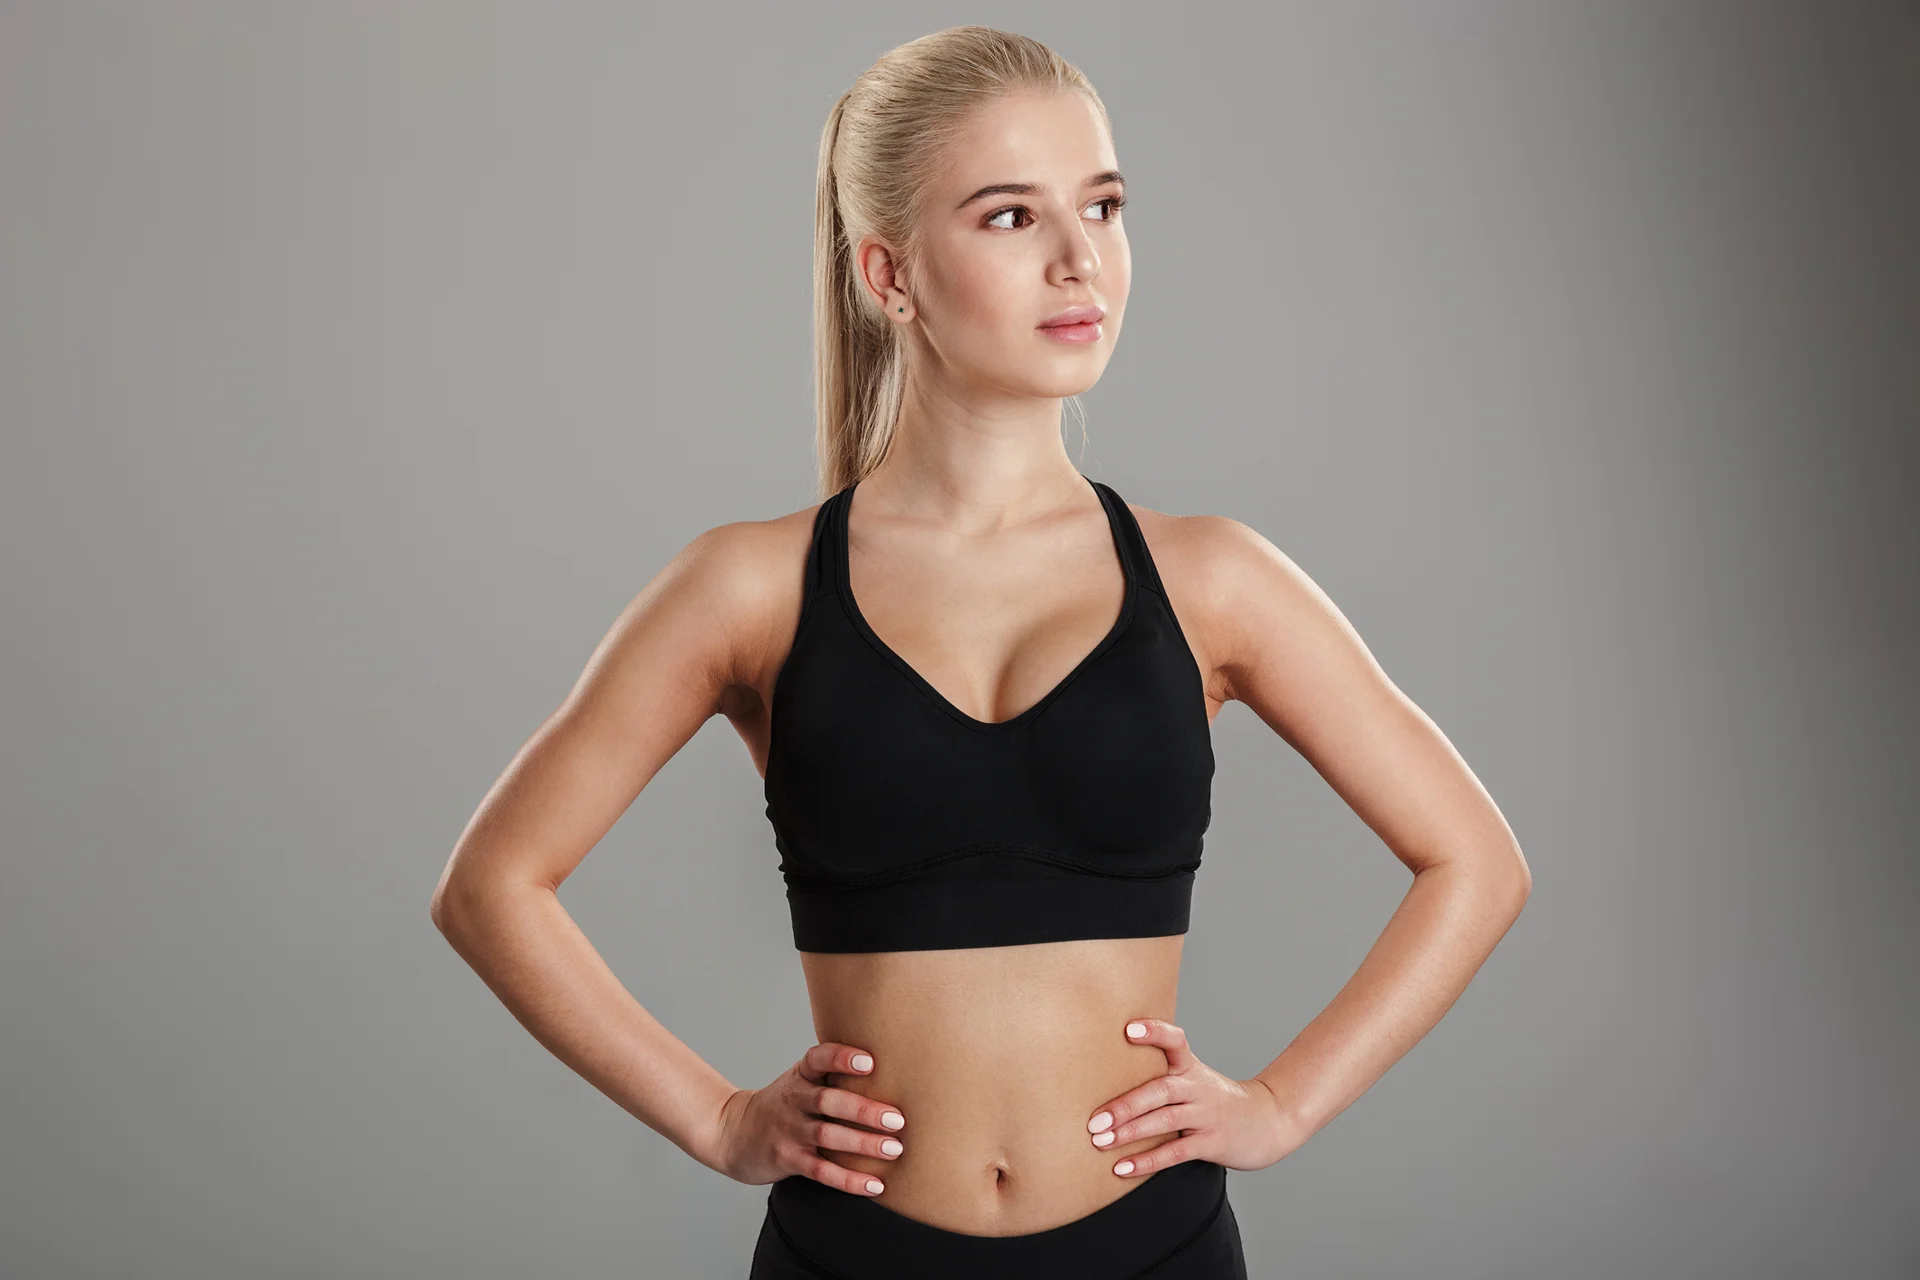 A young woman in a black sports bra showcasing precise arm lipo results on a gray background.